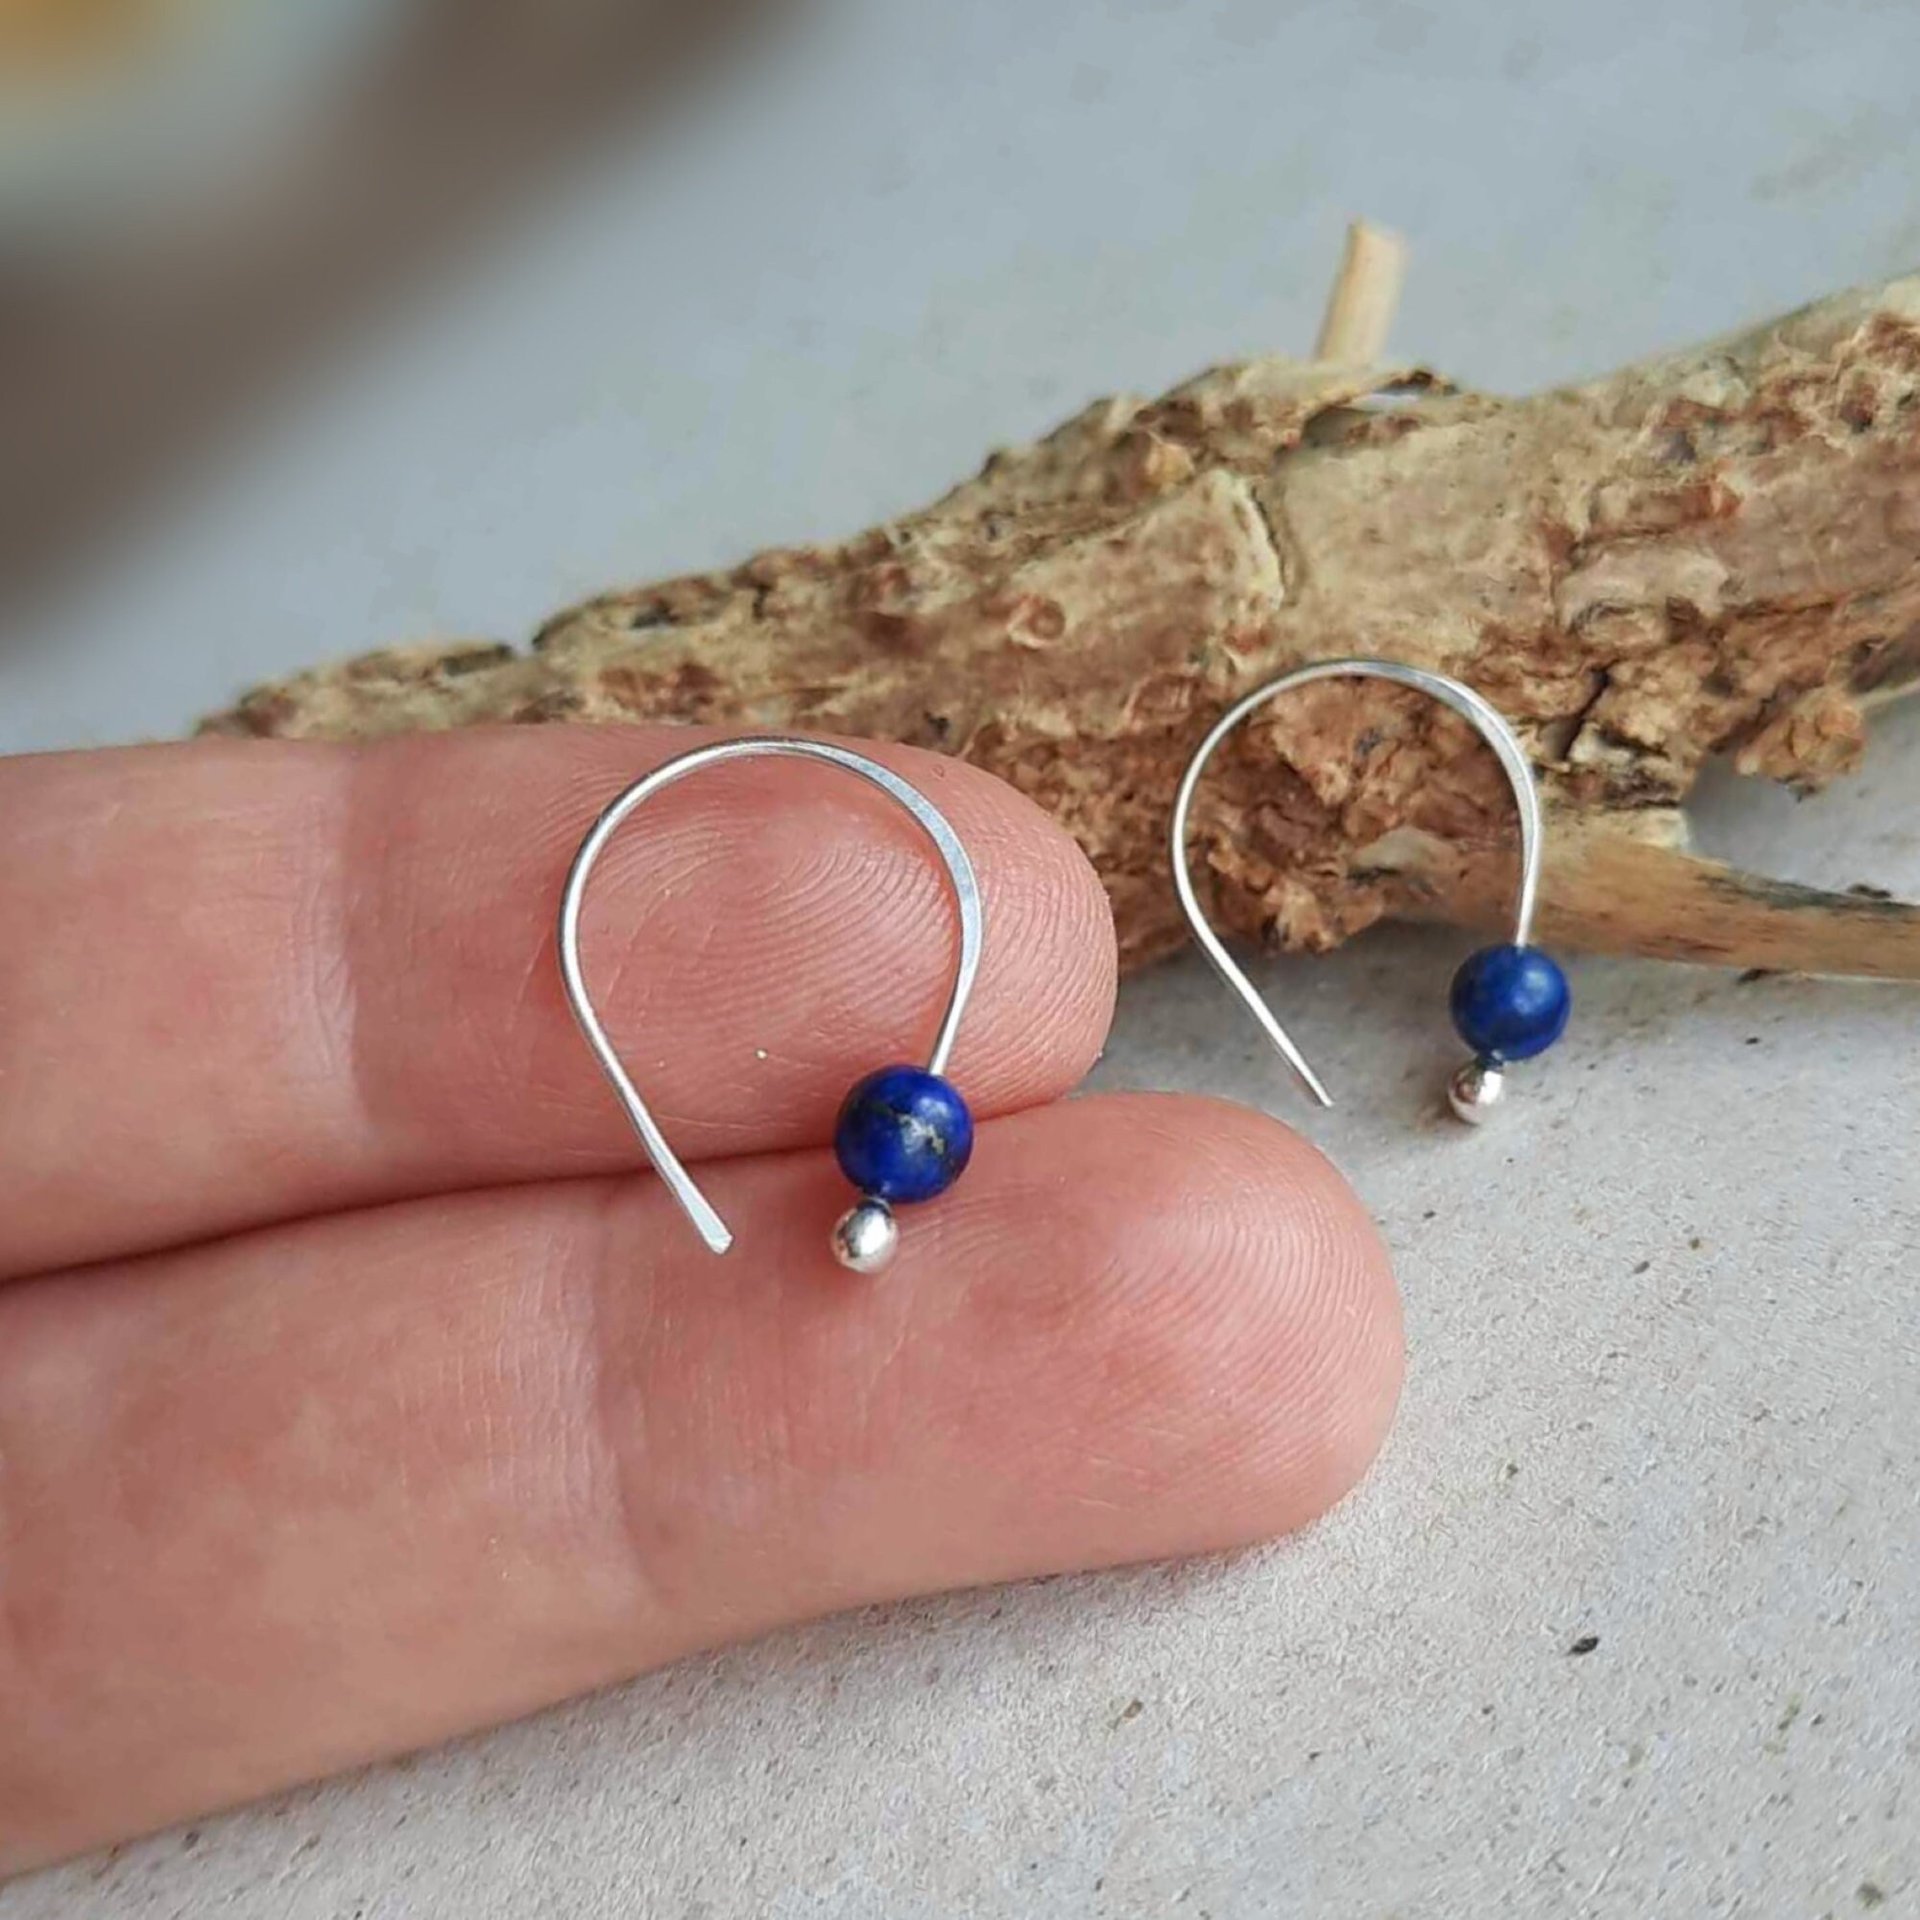 Blue gemstone pull through sterling silver earrings, hand made by The Tiny Tree Frog Jewellery